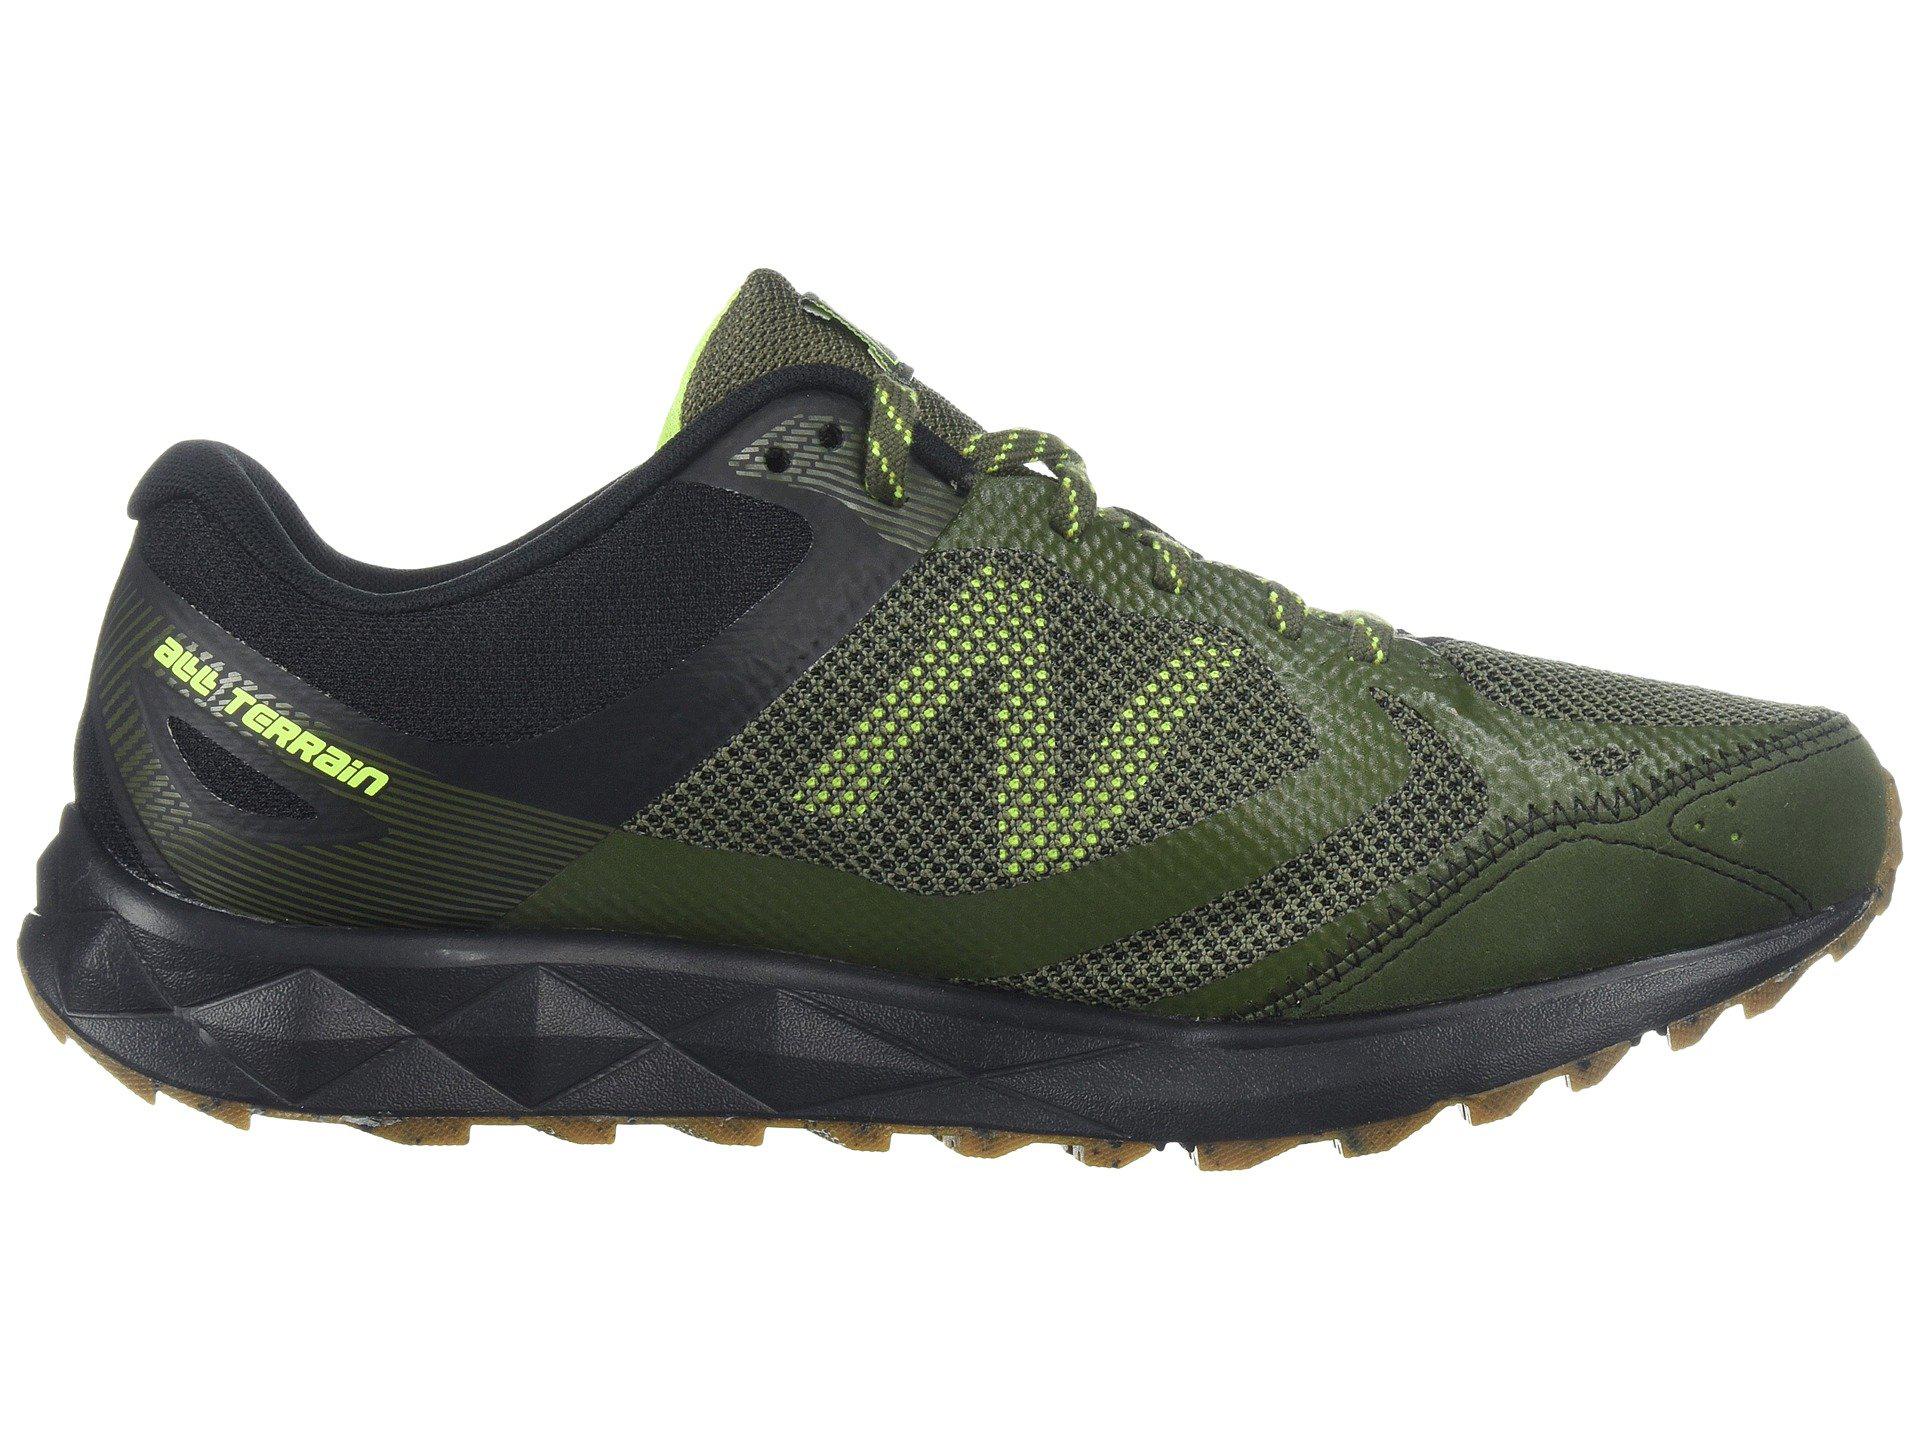 New Balance Synthetic 590v2 Trail Running Shoes in Green/Black (Green) for  Men - Lyst